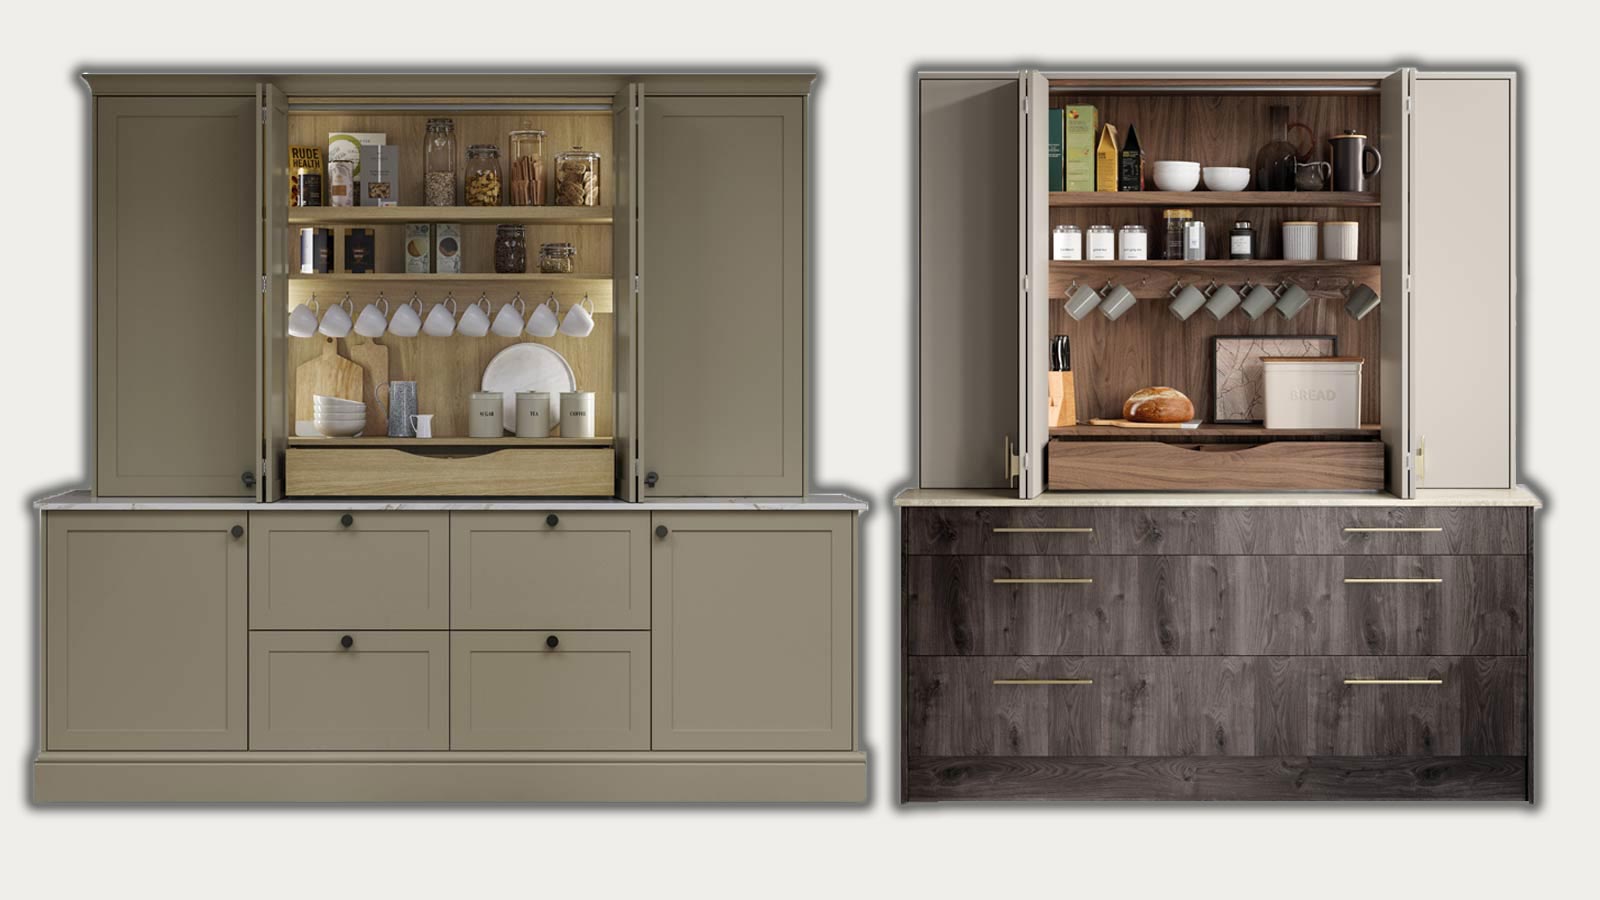 Two Sigma 3 Breakfast Dressers in pale green and oak or pastel grey and walnut